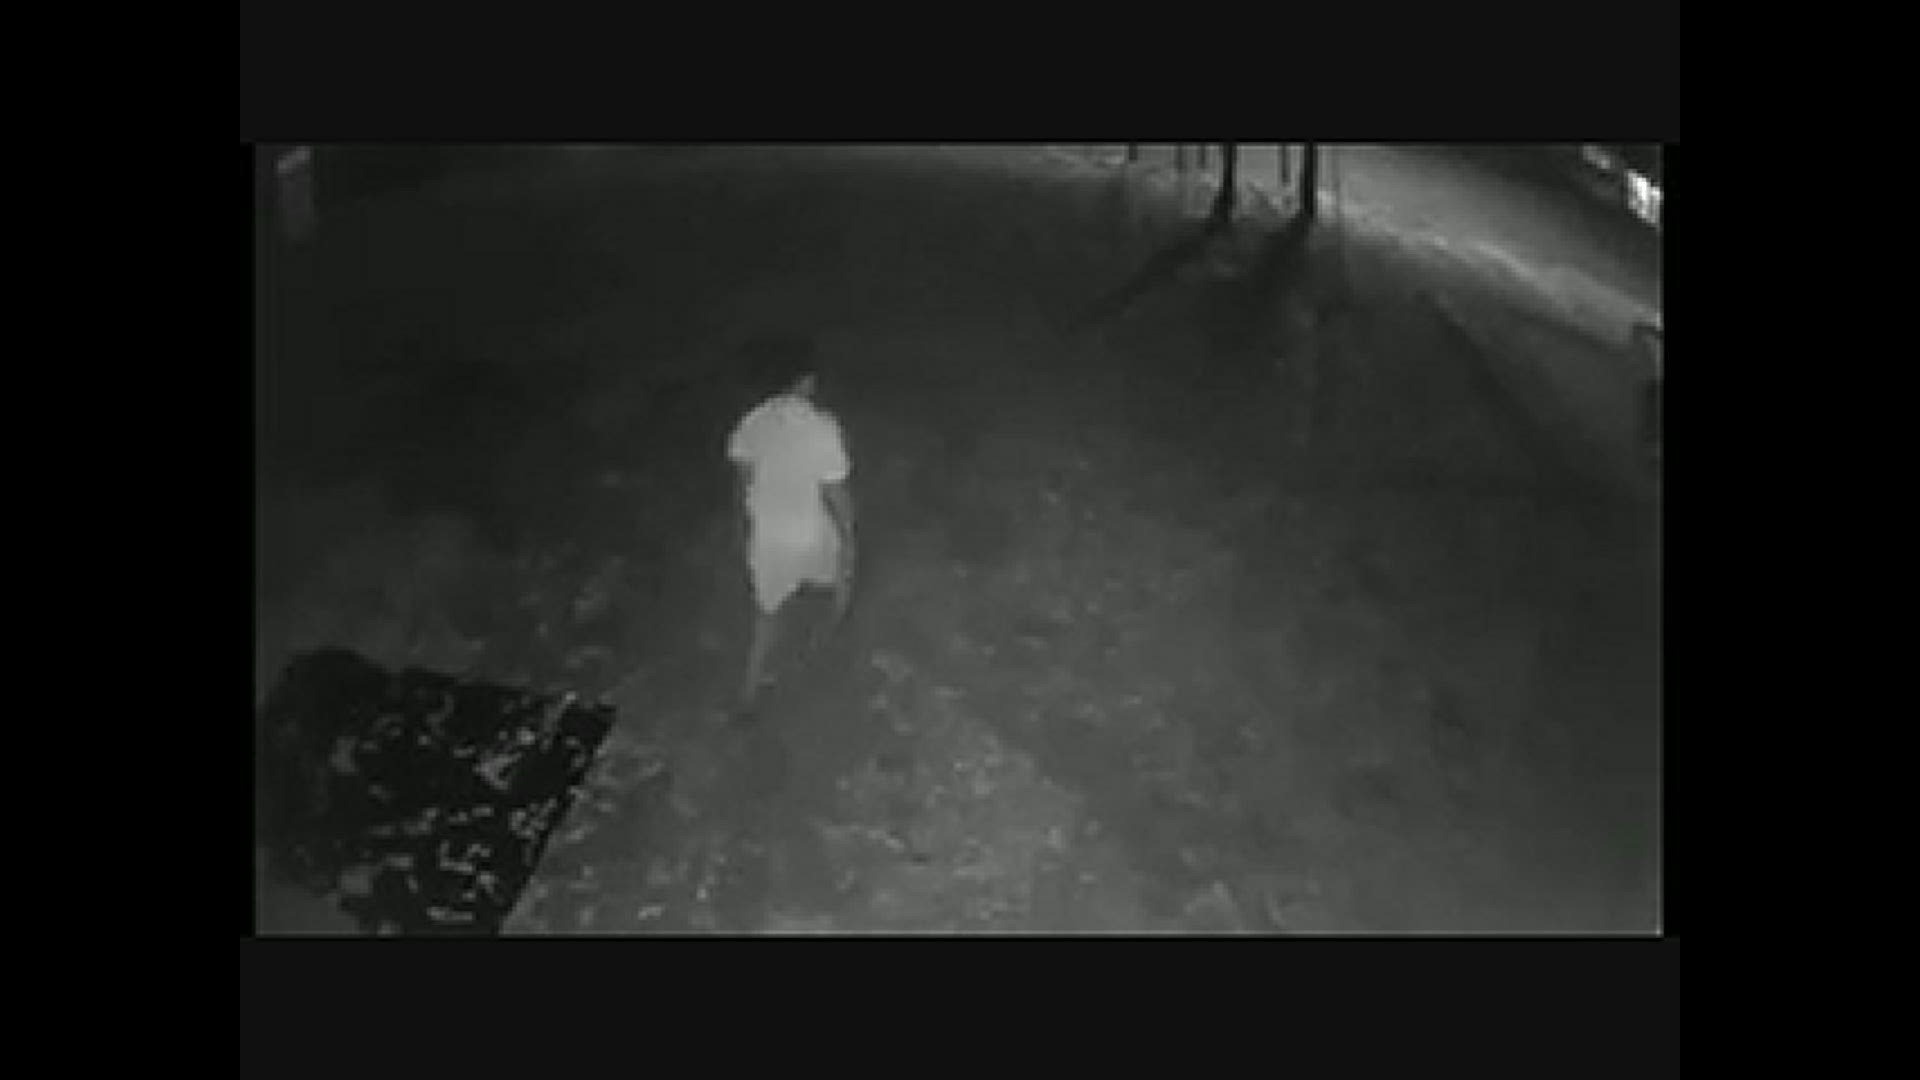 Video shows Ahmaud Arbery walking out of a home under construction, then jogging down Satilla Drive in December.